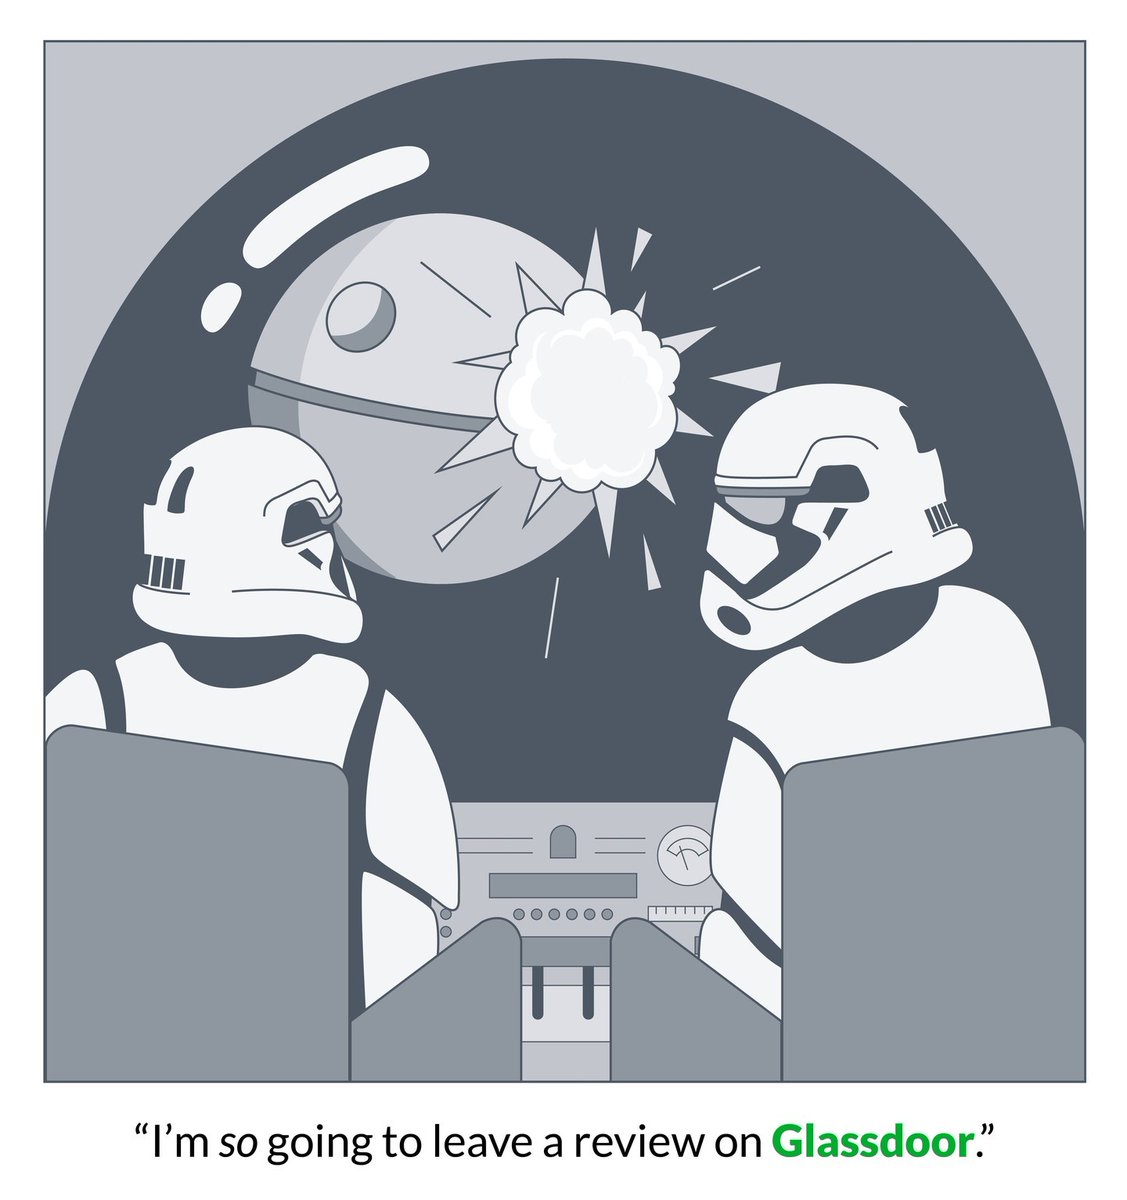 Whether you live on Earth or in a galaxy far, far away, you deserve a job that loves you back. #Glassdoor #GDforEmployers